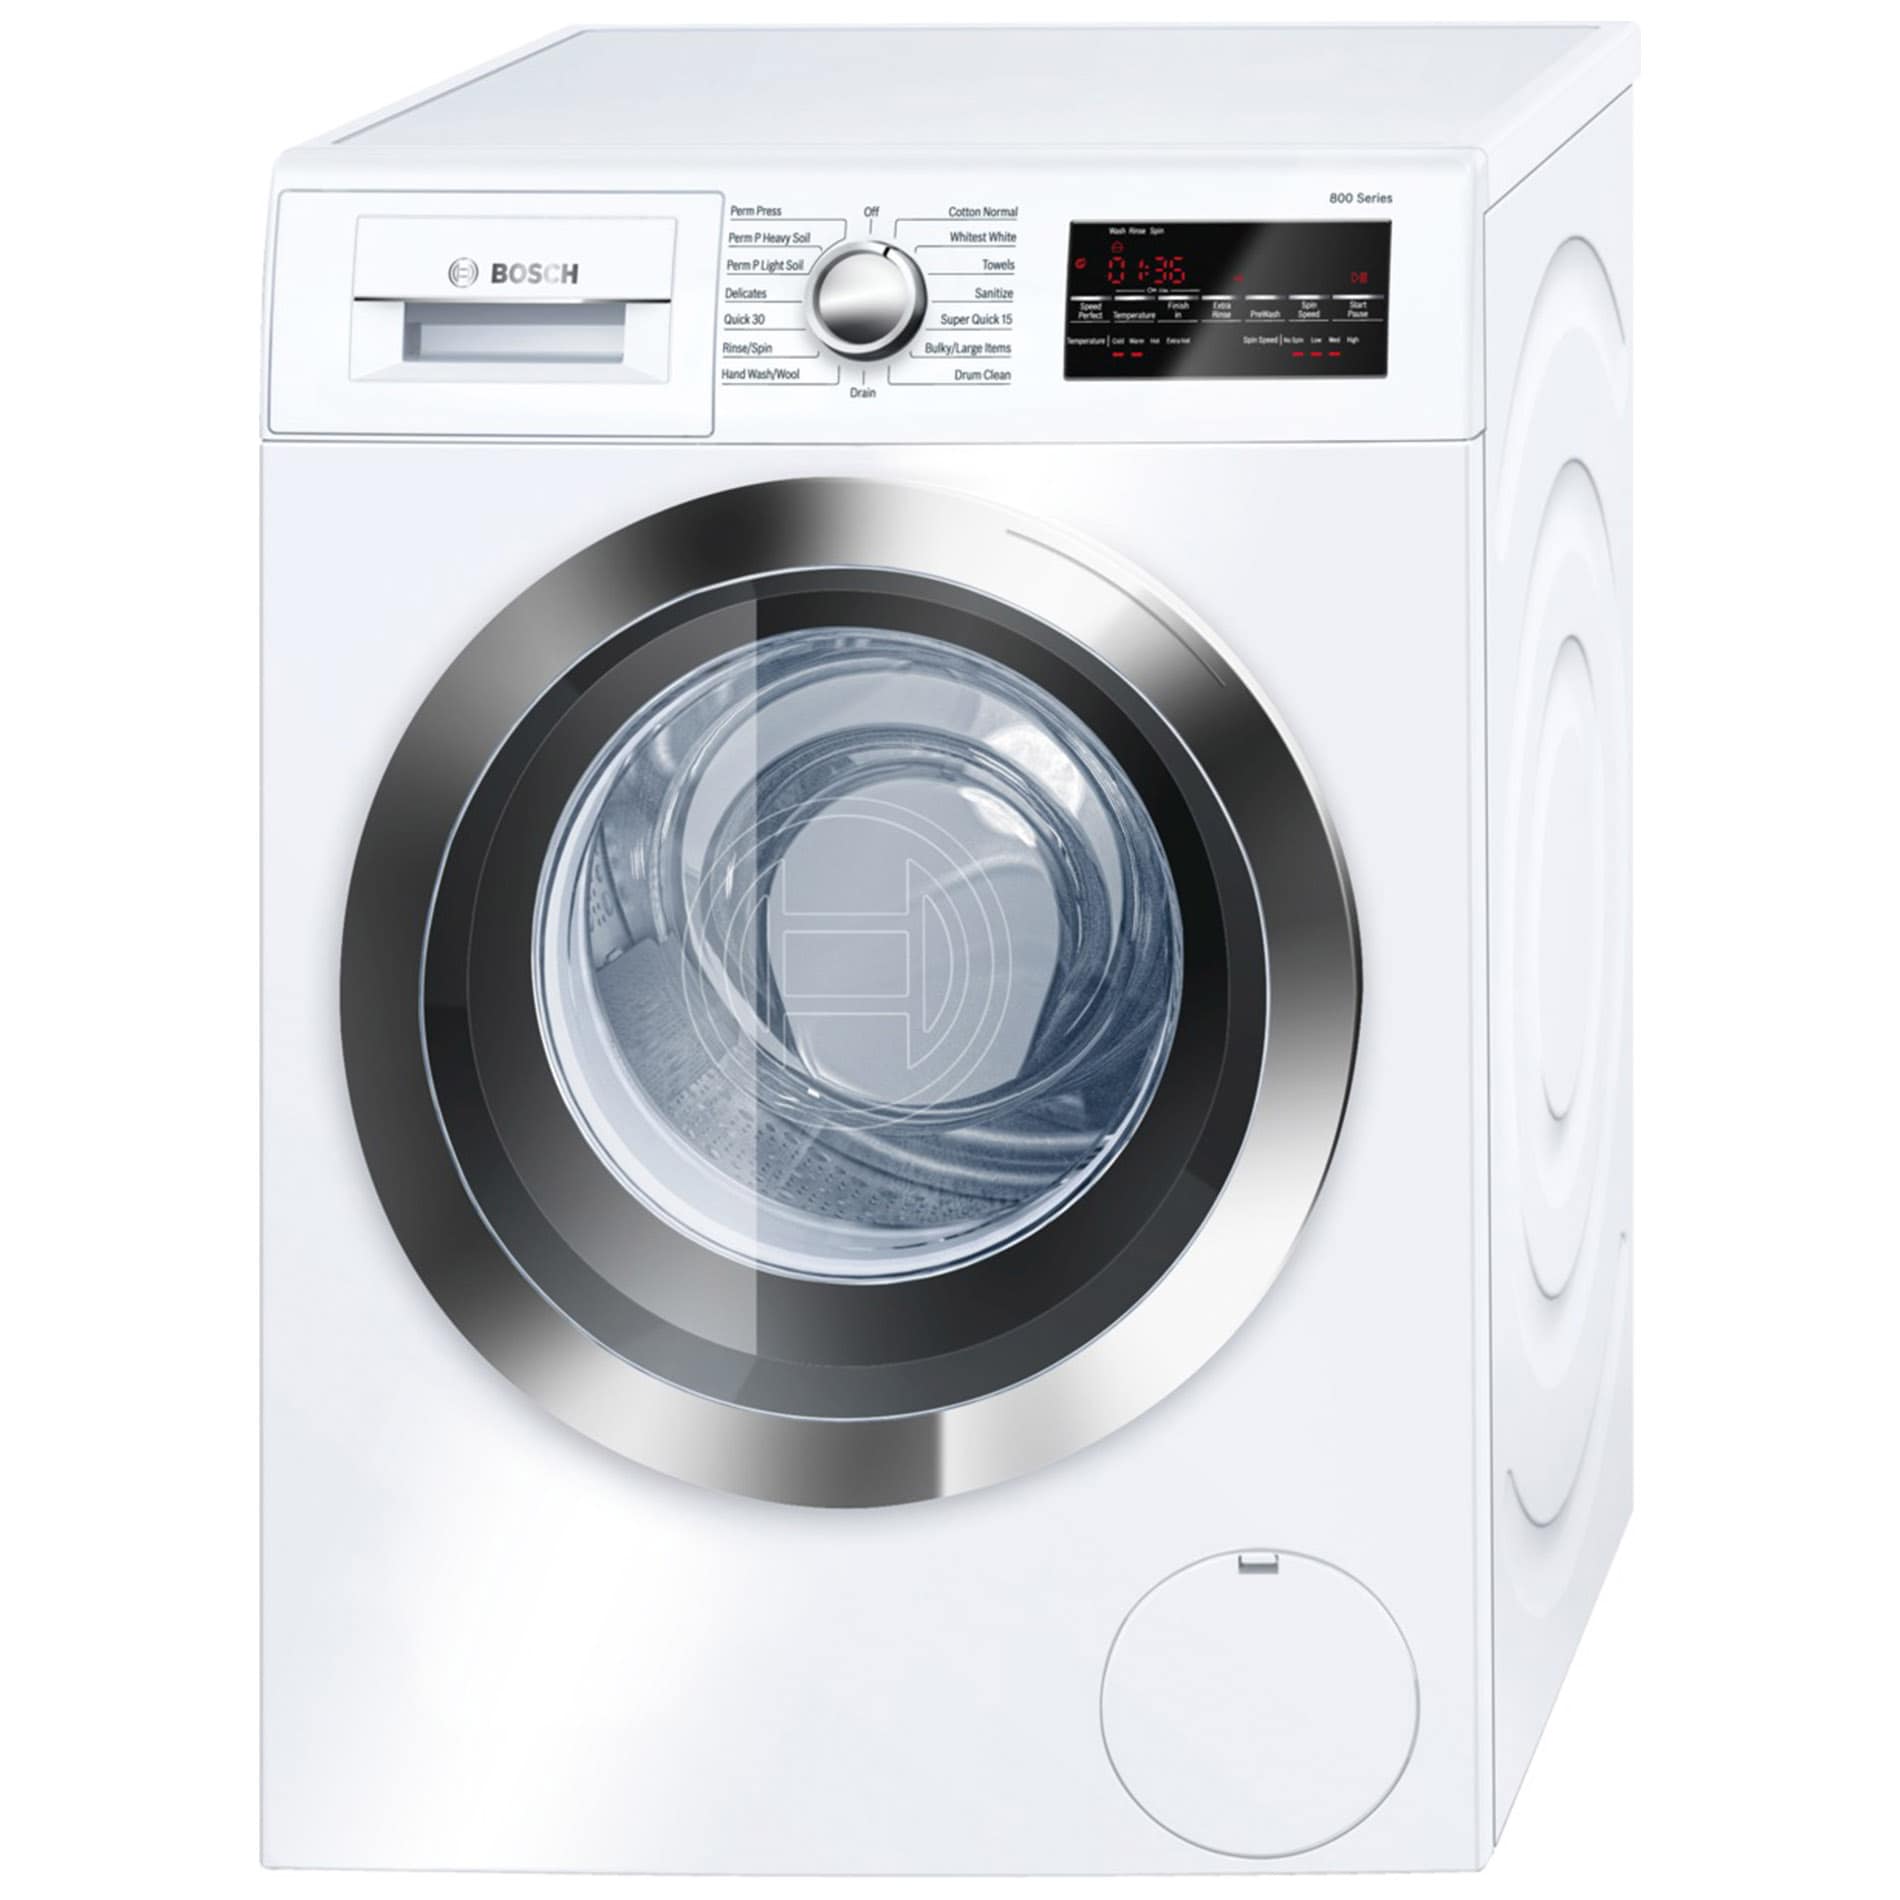 Bosch 800 2.2-cu ft High Efficiency Stackable Front-Load Washer (White/Chrome Trim) ENERGY STAR Stainless Steel | WAT28402UC